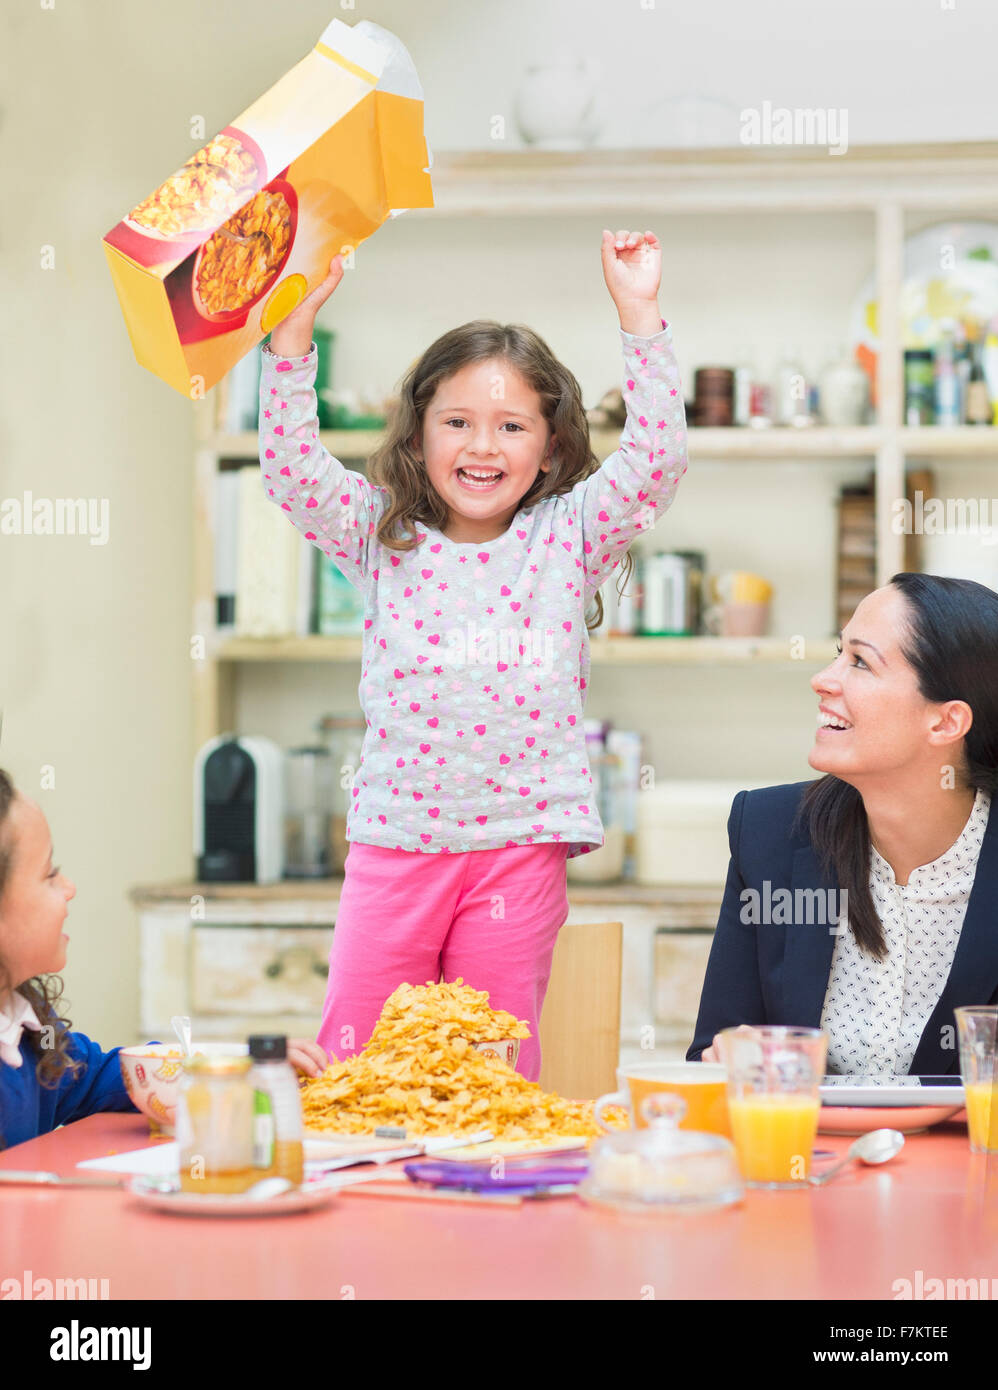 Portrait enthusiastic girl cheering with cereal box at breakfast table Stock Photo